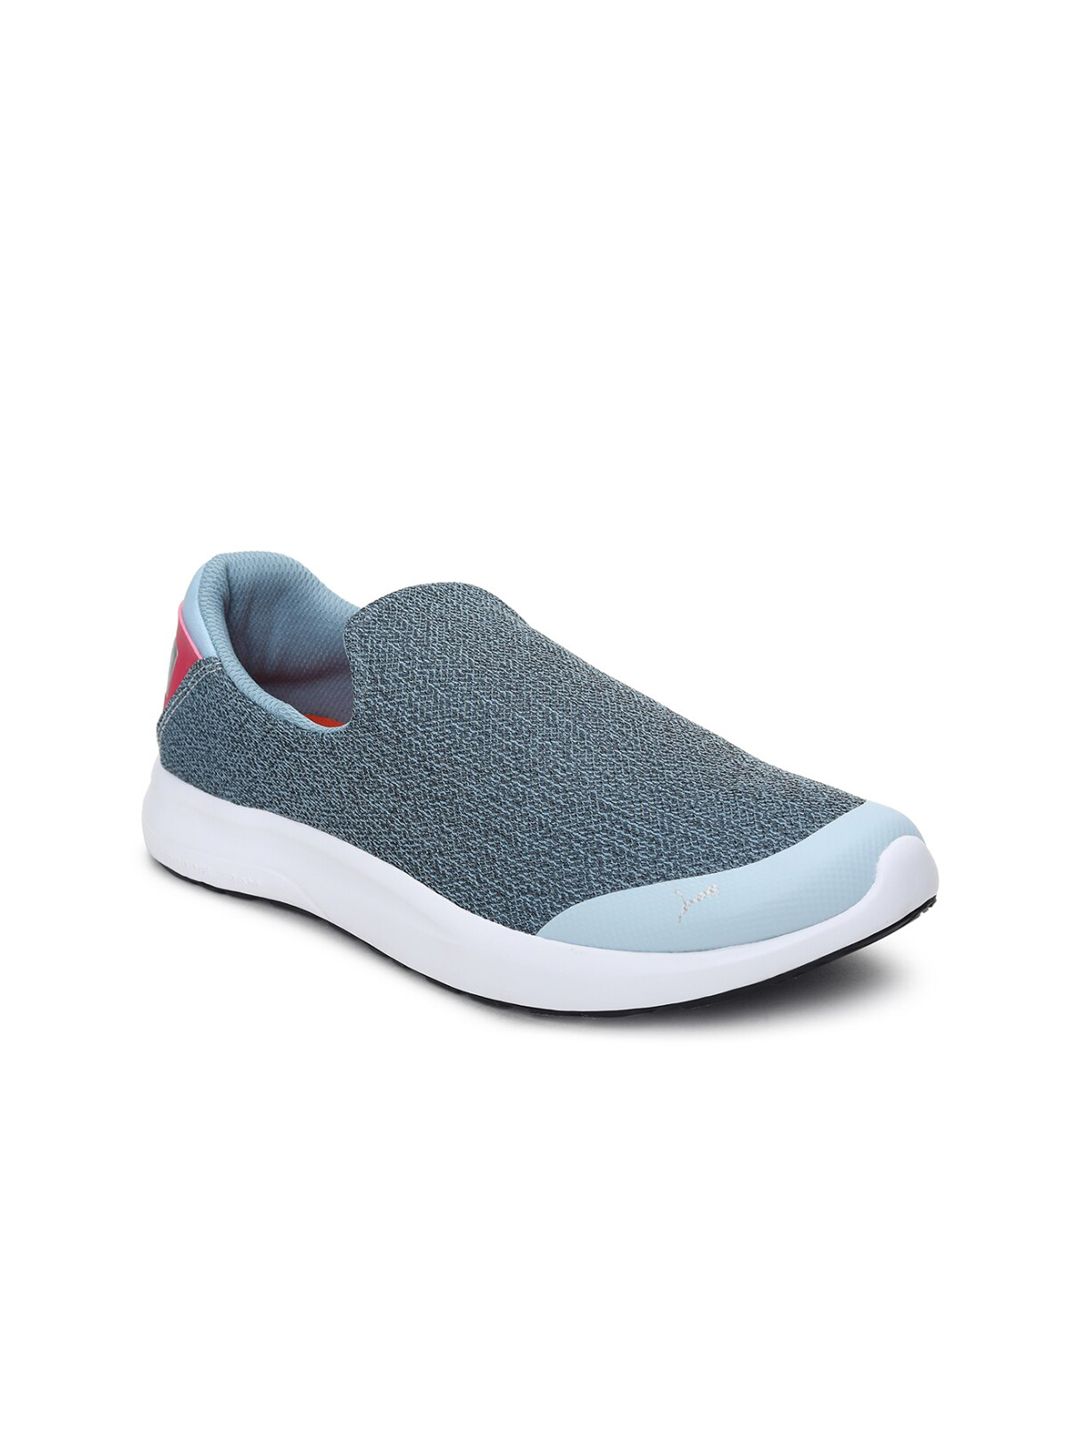 Puma Women Blue Angry Birds Driving Shoes Price in India